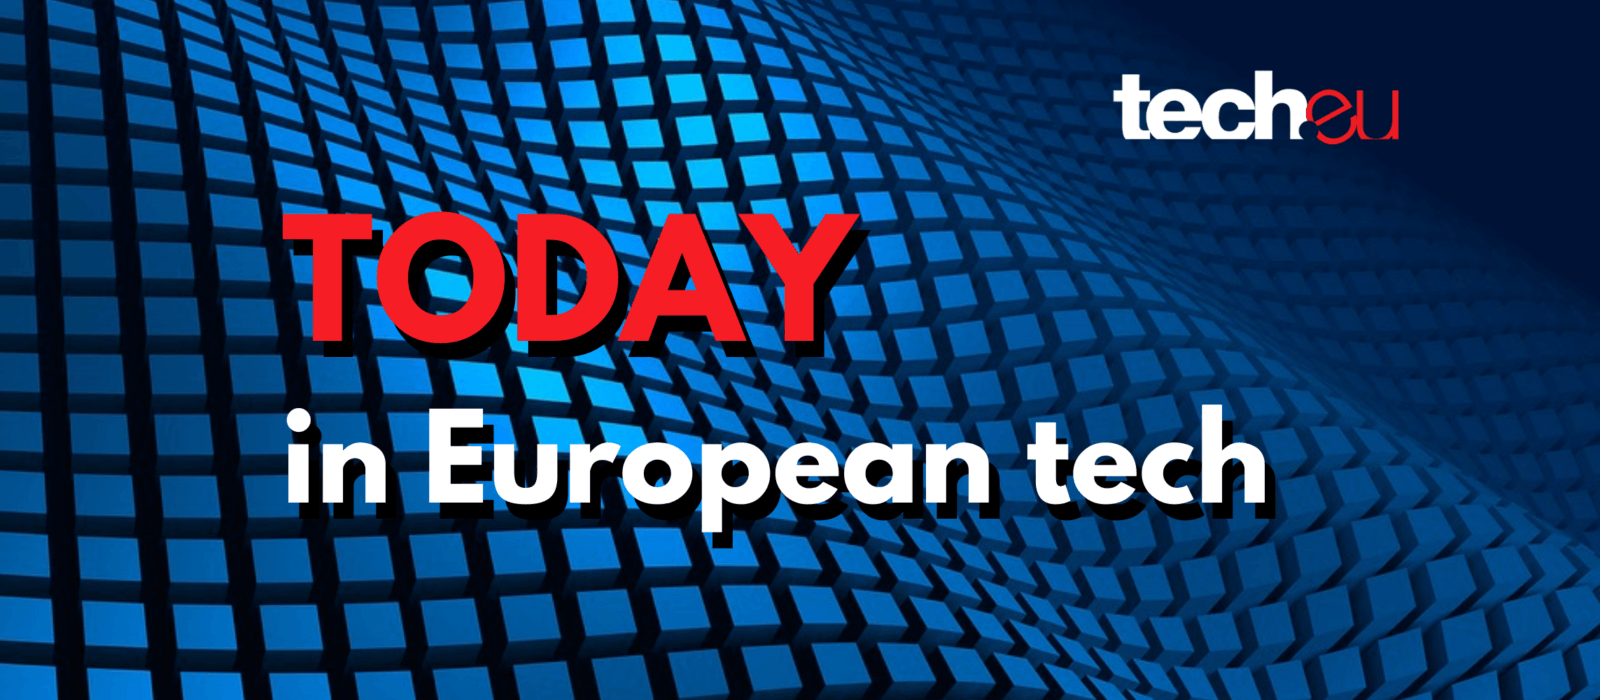 Today in European Tech: Asos buys Topshop and other brands for £330m, EU calls $15.7 billion Apple tax ruling ‘contradictory’, and more